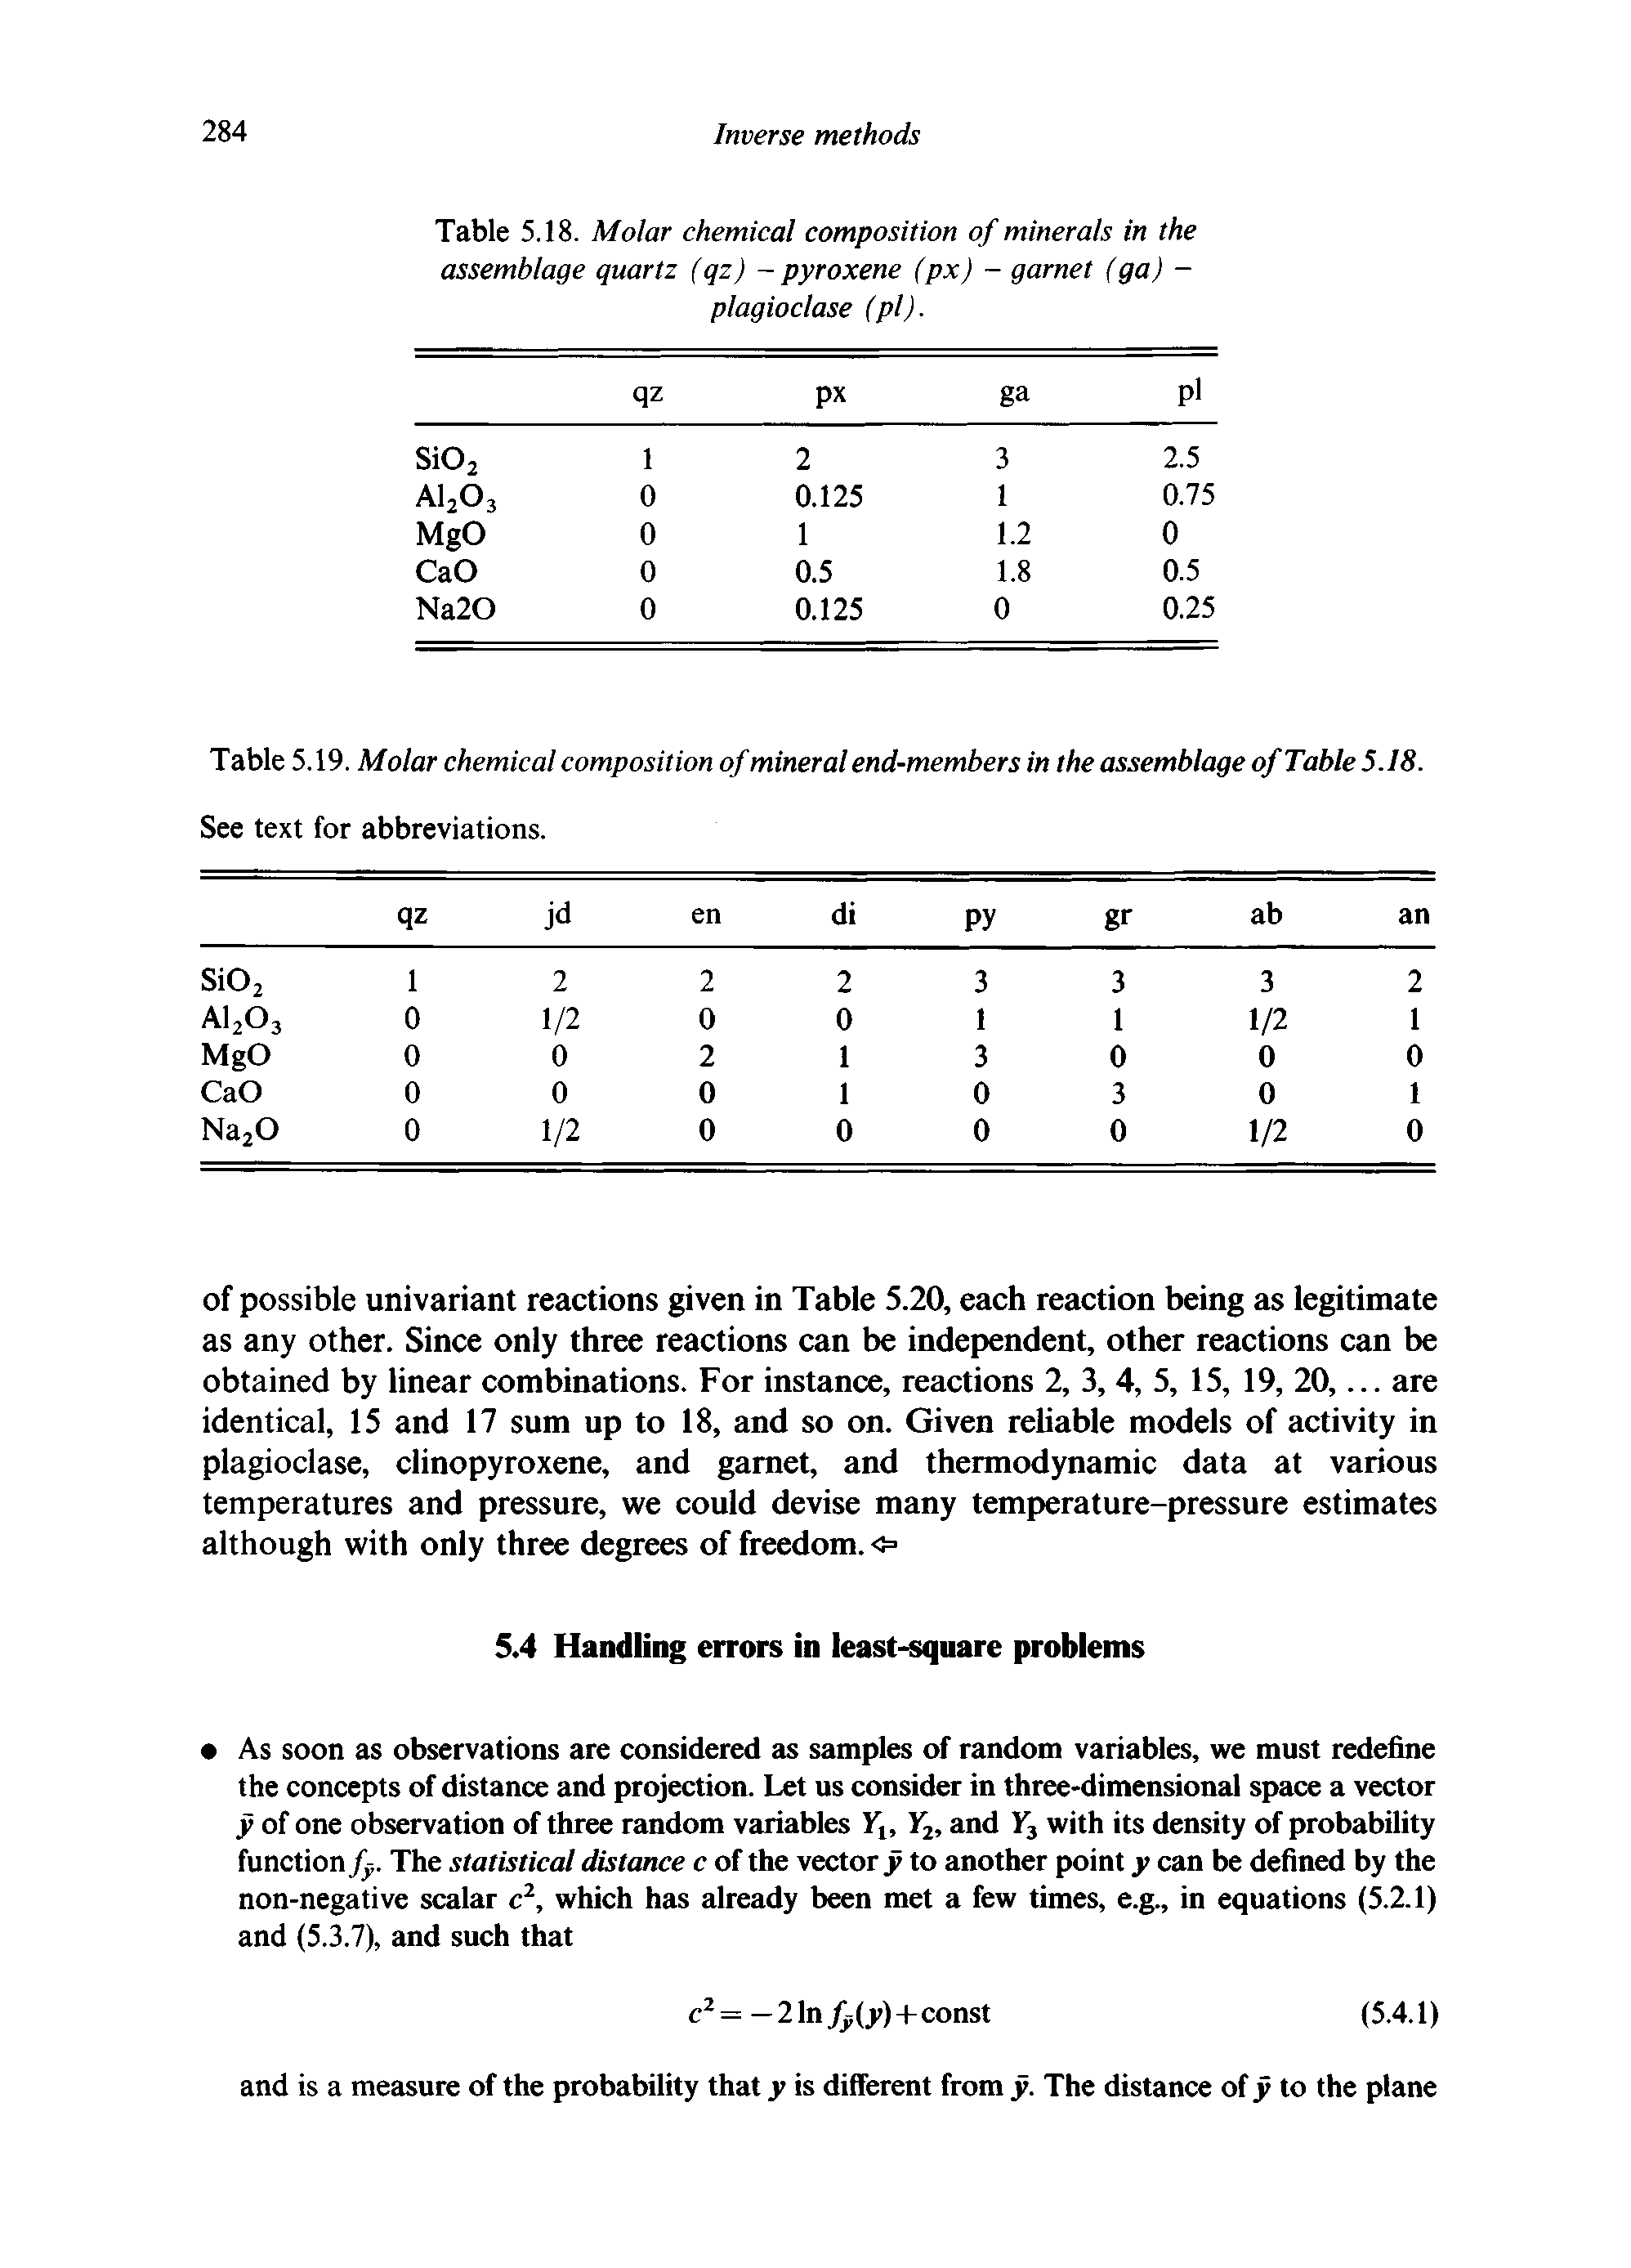 Table 5.19. Molar chemical composition of mineral end-members in the assemblage of Table 5.18. See text for abbreviations.